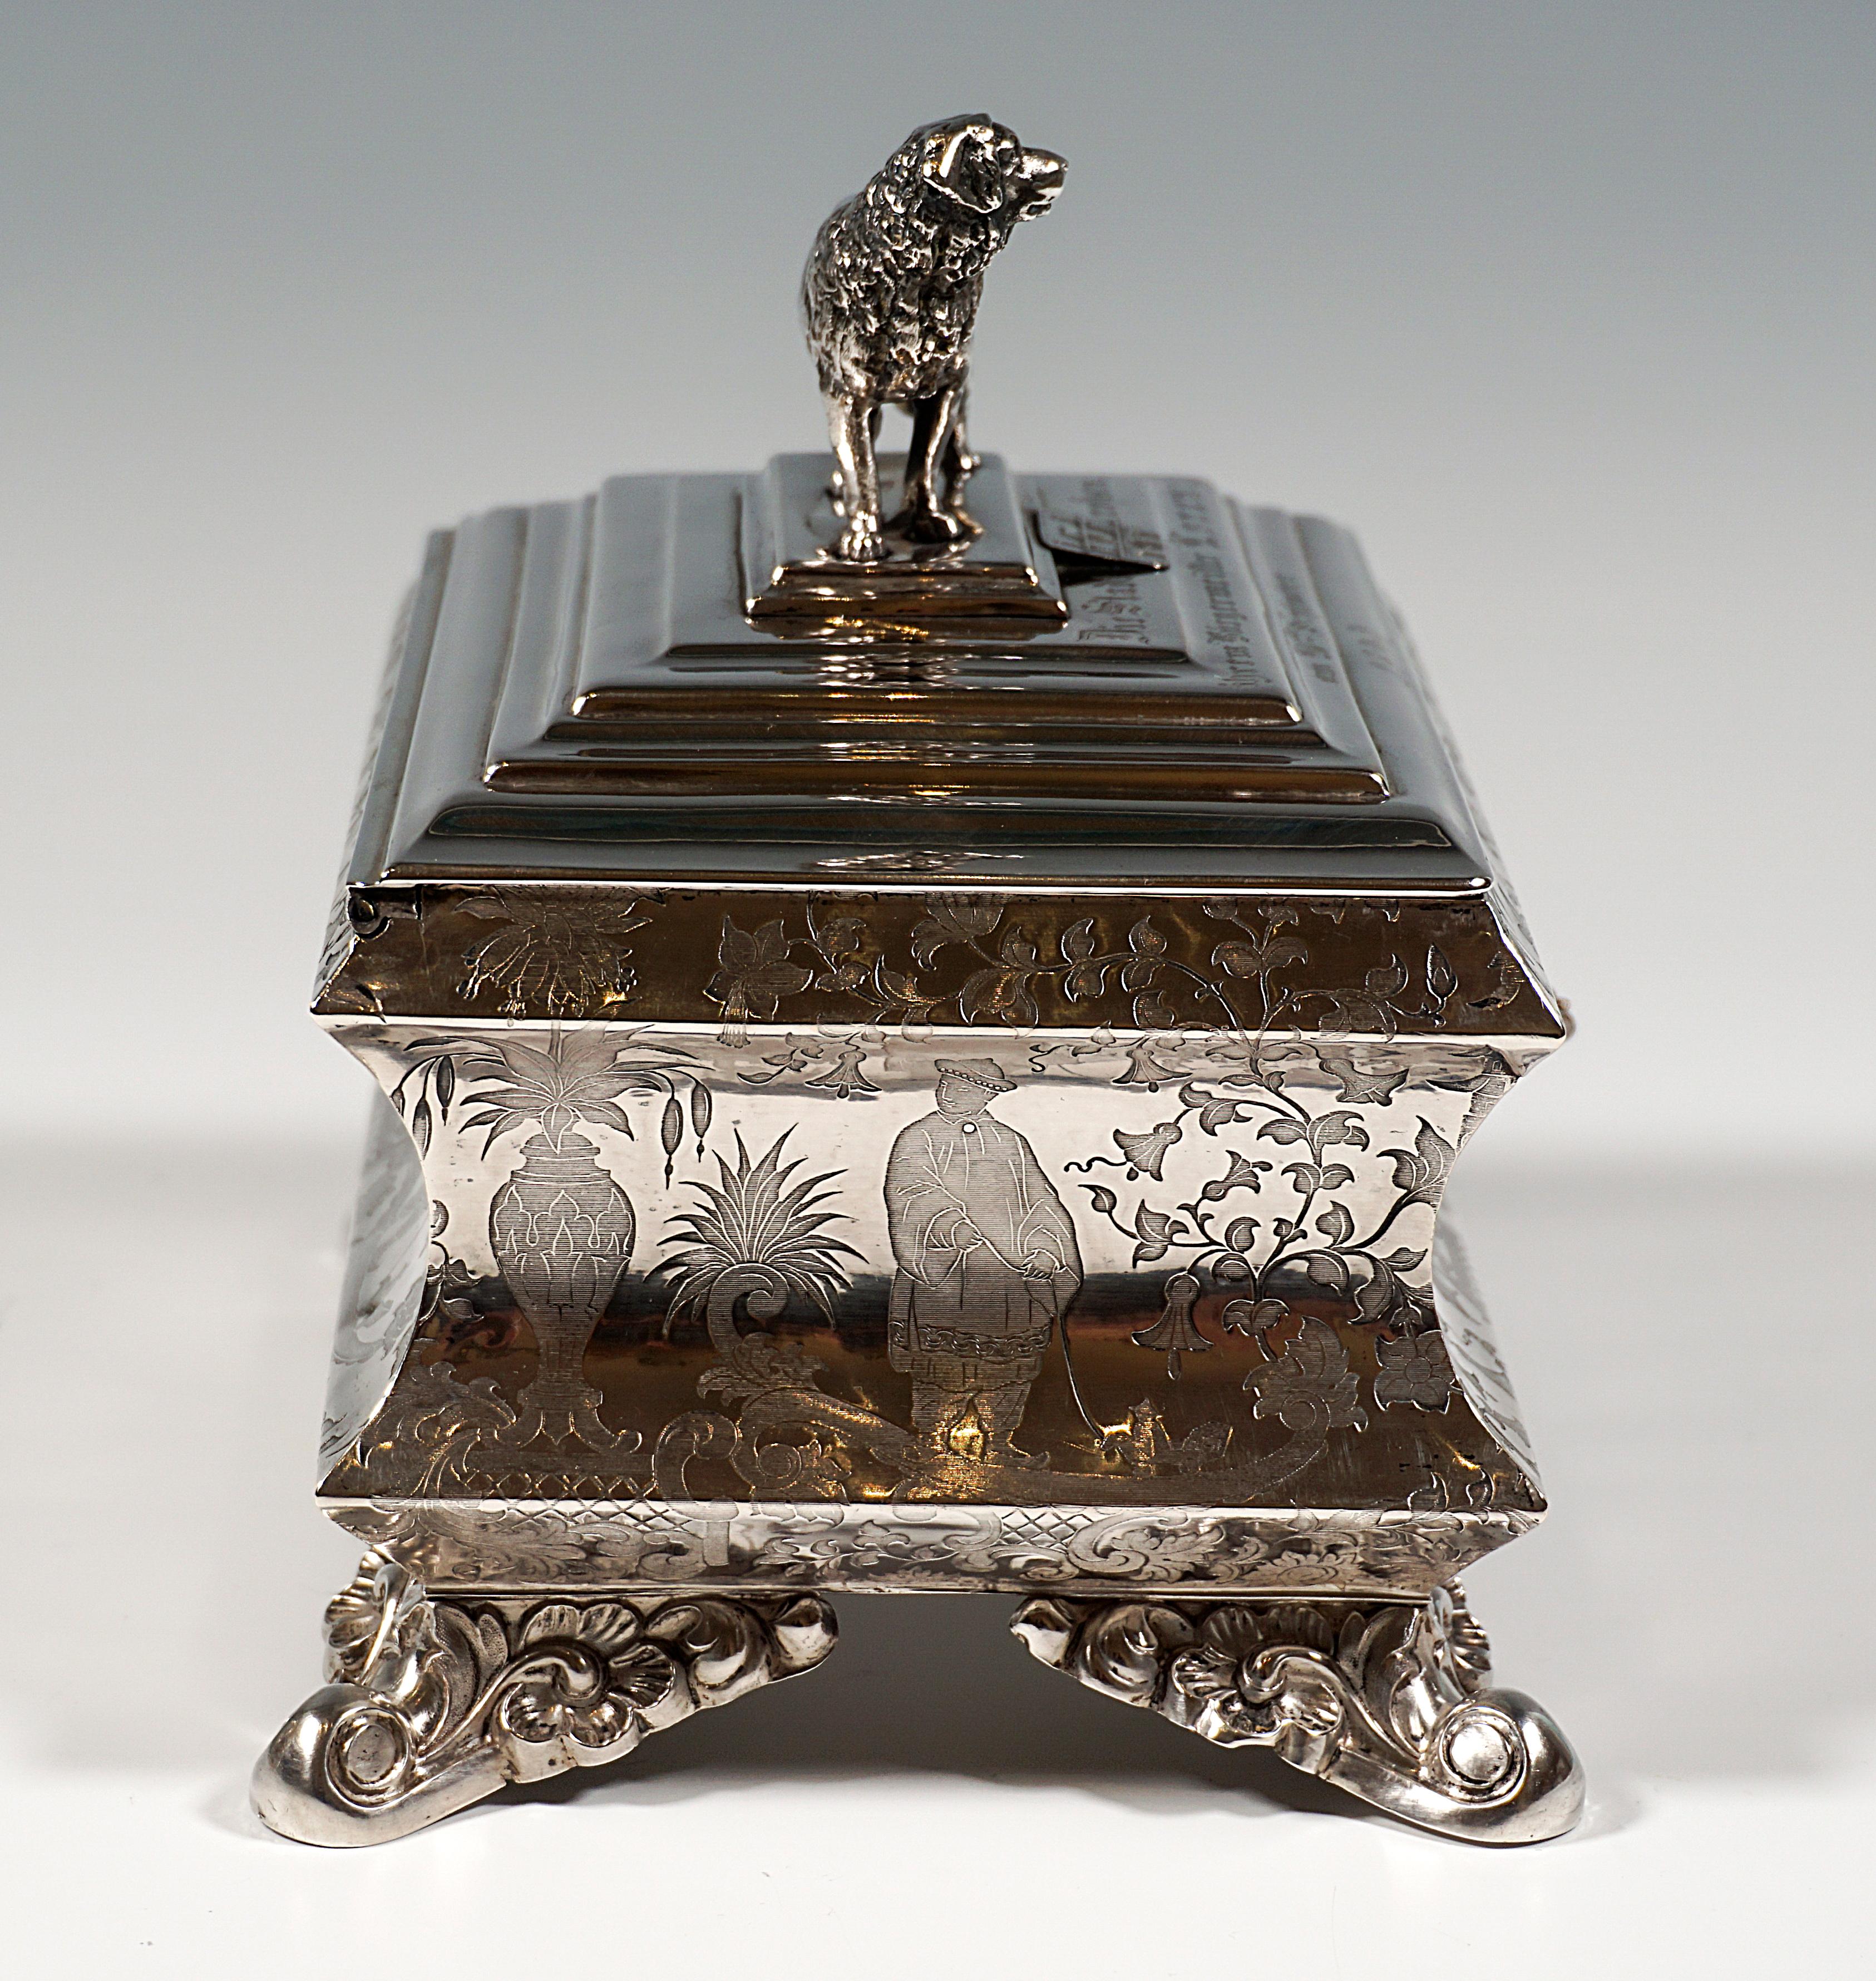 Large late Biedermeier silver sugar box on four voluted, leaf-decorated feet, merging into a rectangular body with wide fluting in the middle, walls decorated with fine chinoiserie decoration, stepped hinged lid, crowned by a fully sculpted